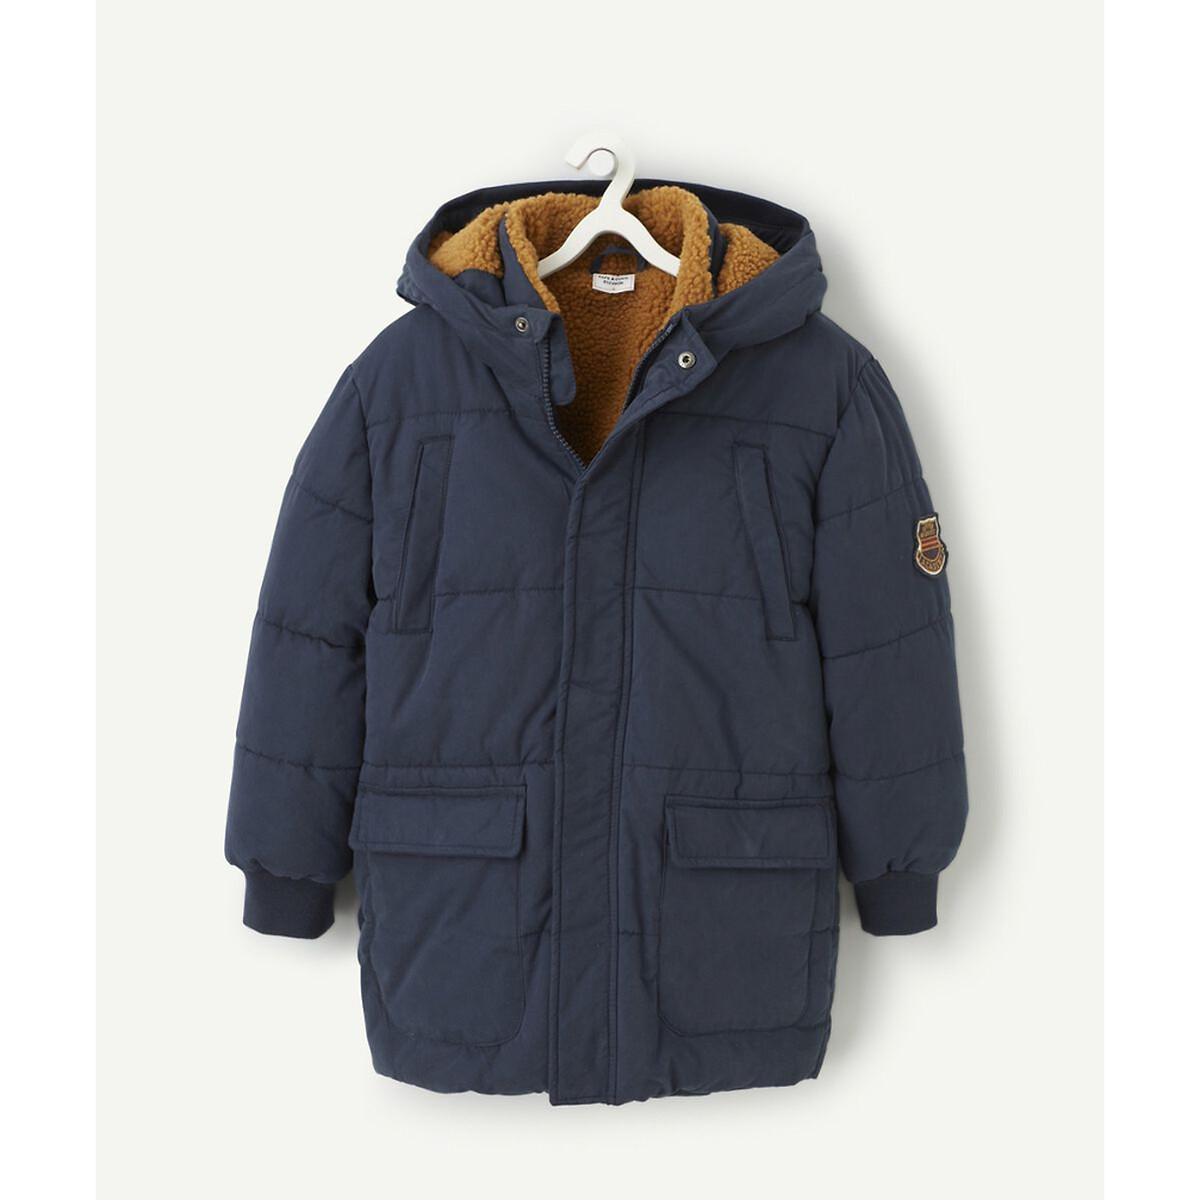 Warm Hooded Padded Jacket in Cotton Mix, Mid-Length